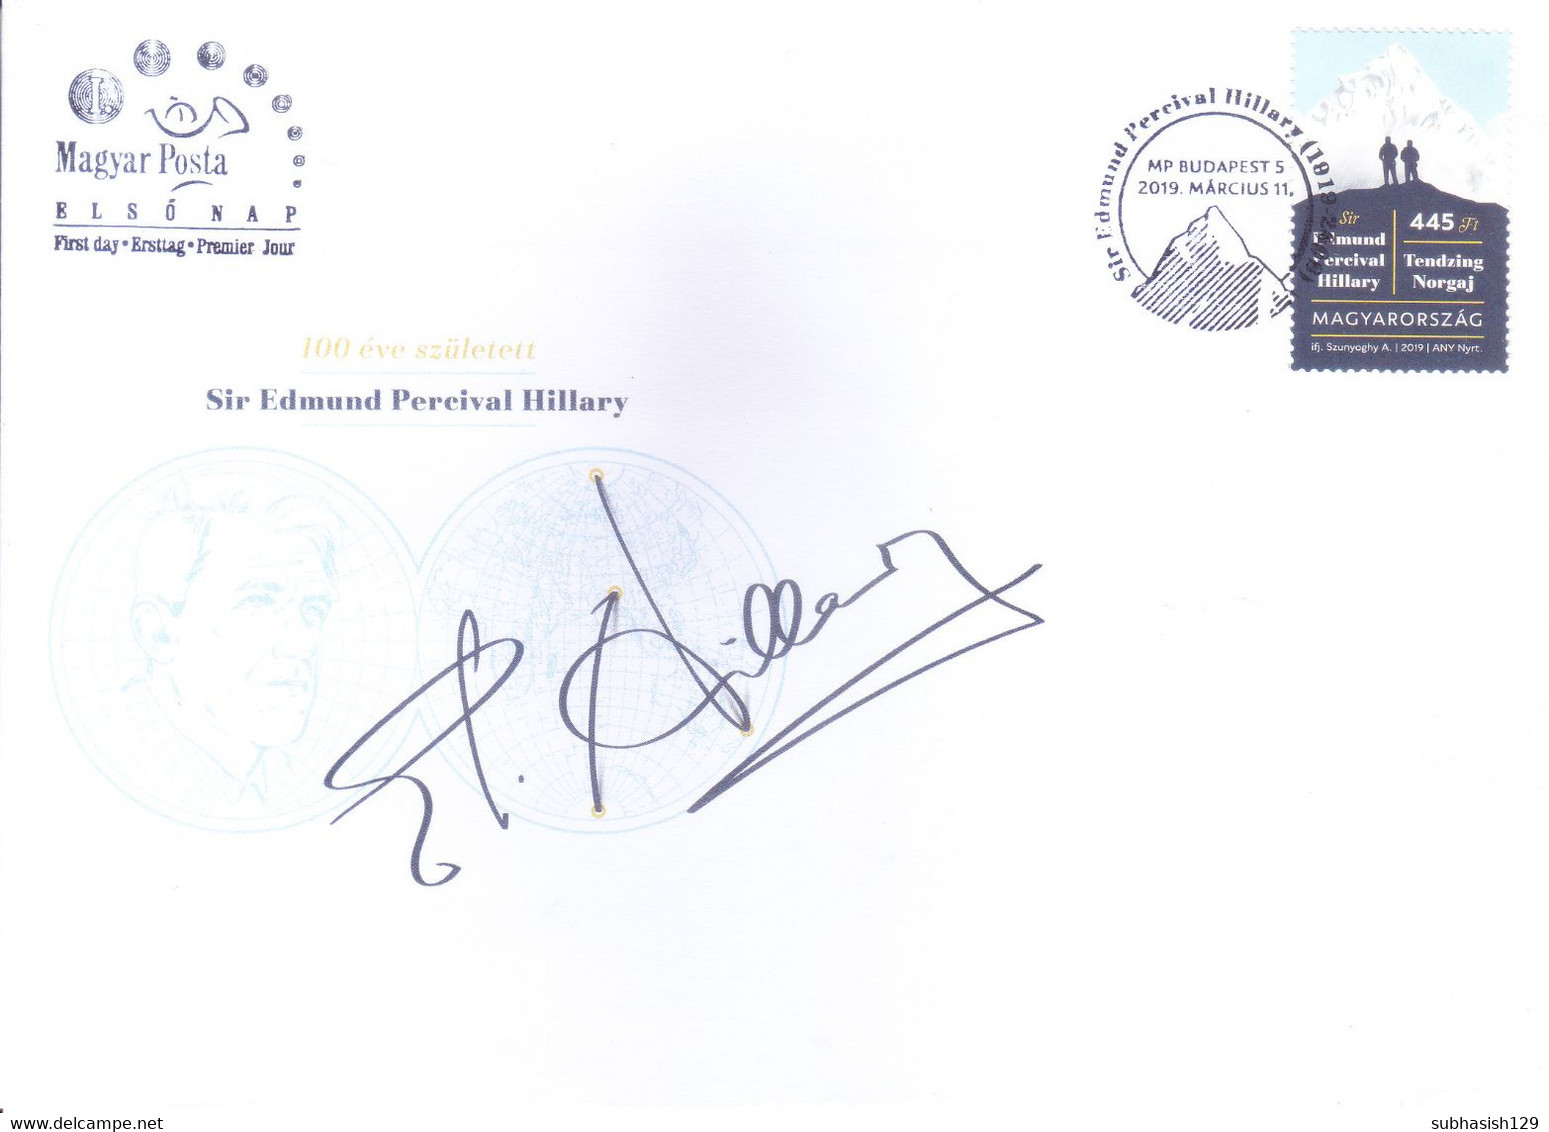 HUNGARY : FIRST DAY COVER : 11 MARCH 2019 : BIRTH CENTENARY OF SIR EDMUND PERCIVAL HILLARY - Briefe U. Dokumente